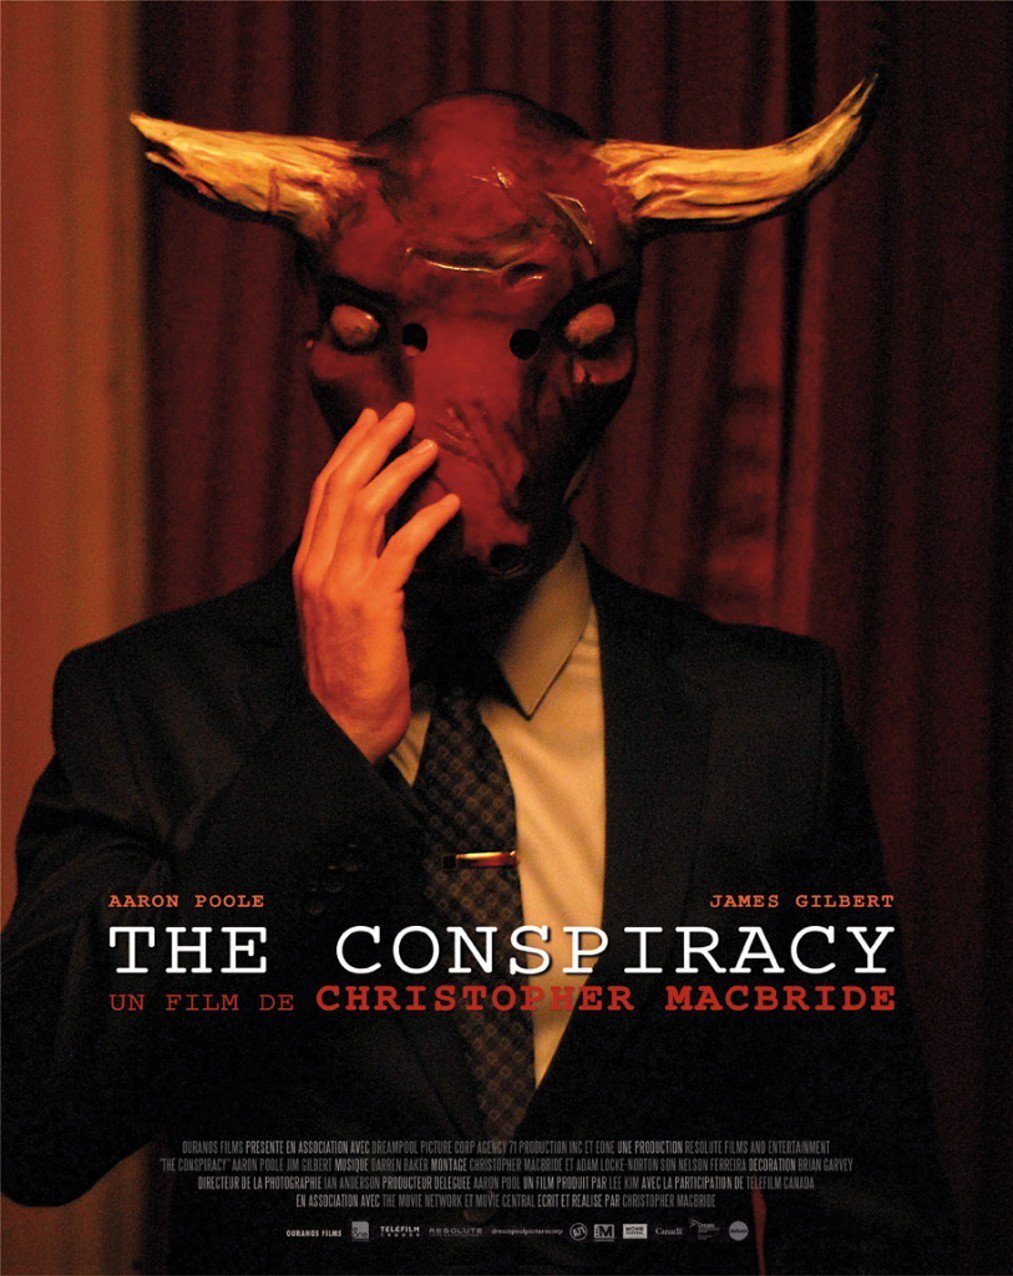 The Conspiracy – TubiTV Conspiracy Drama (TubiTV is FREE on the internet with commercials)